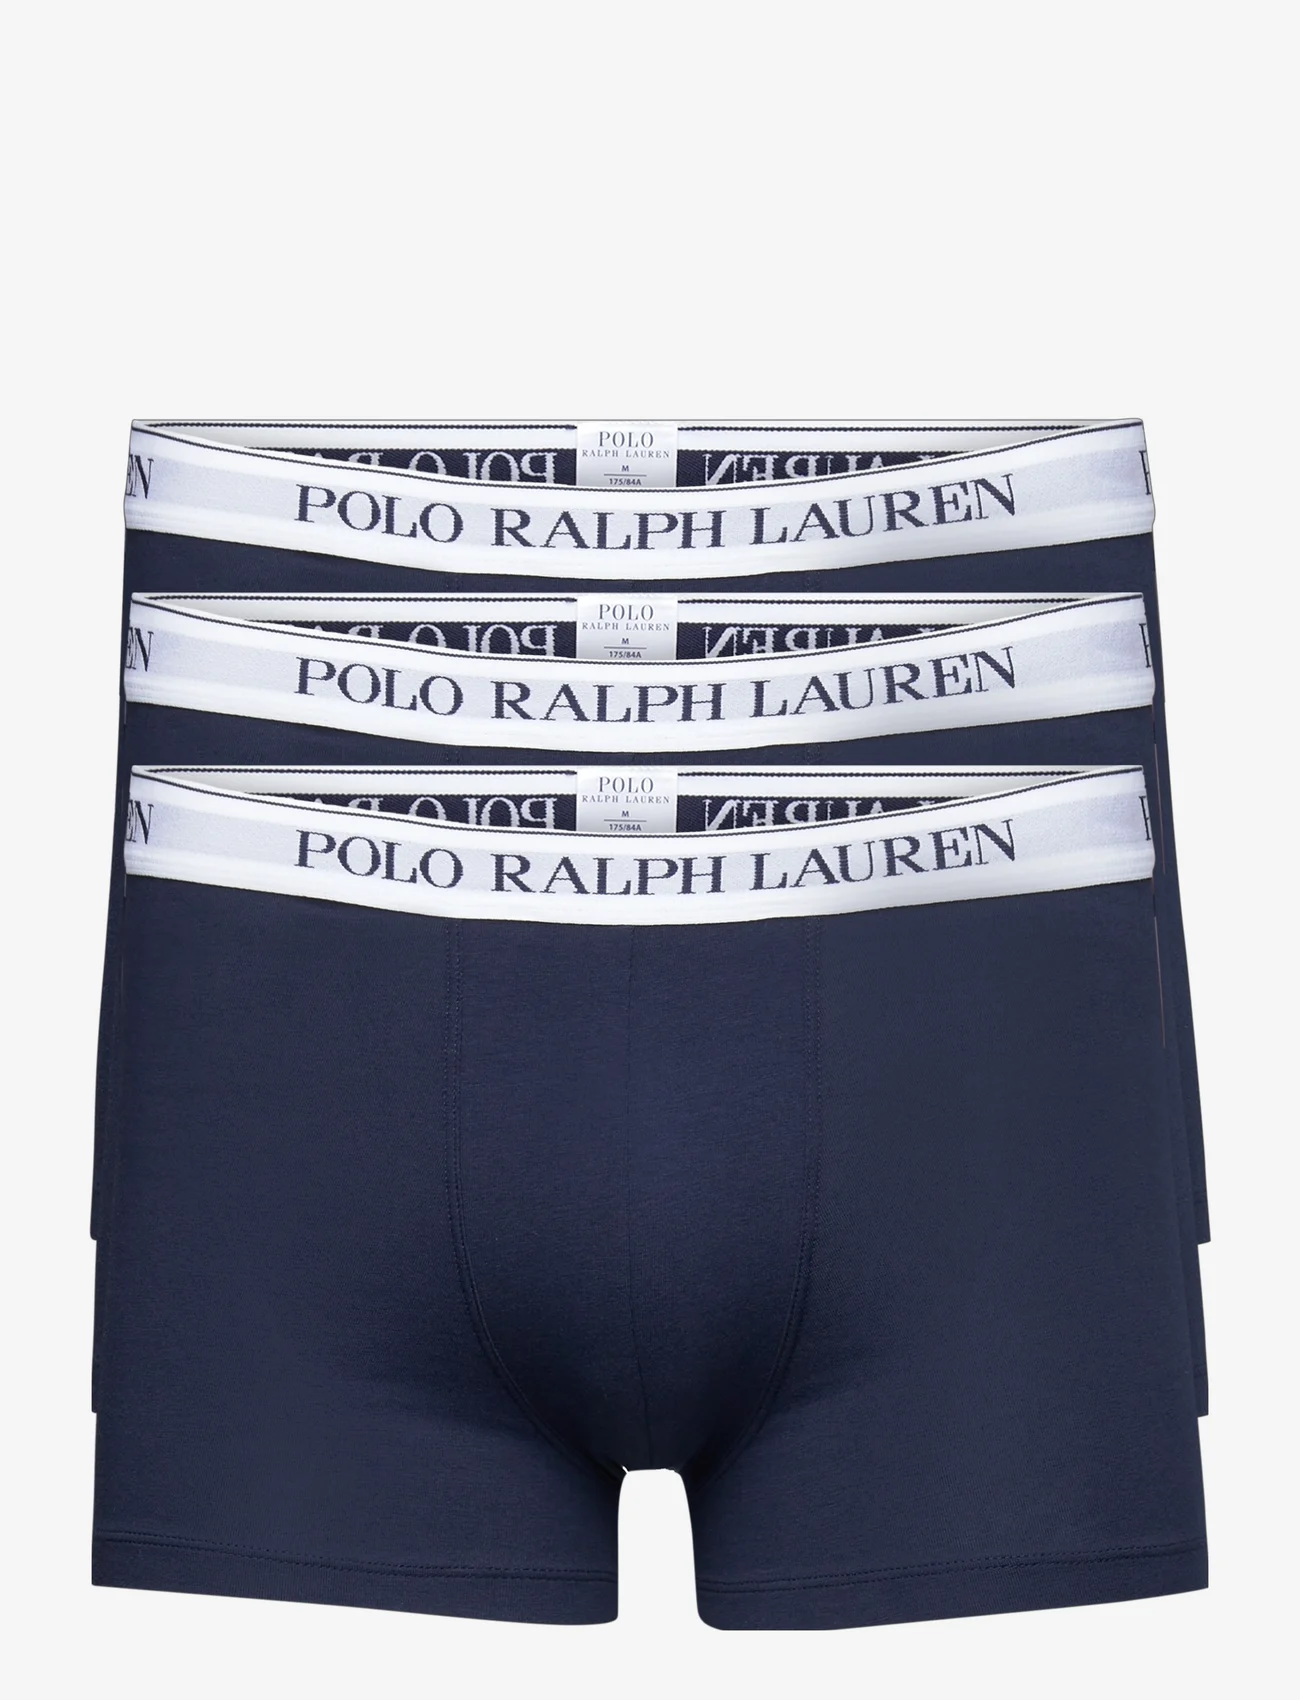 Polo Ralph Lauren Underwear - Classic Stretch-Cotton Trunk 3-Pack - multipack underpants - 3pk nvy wht/nvy w - 0